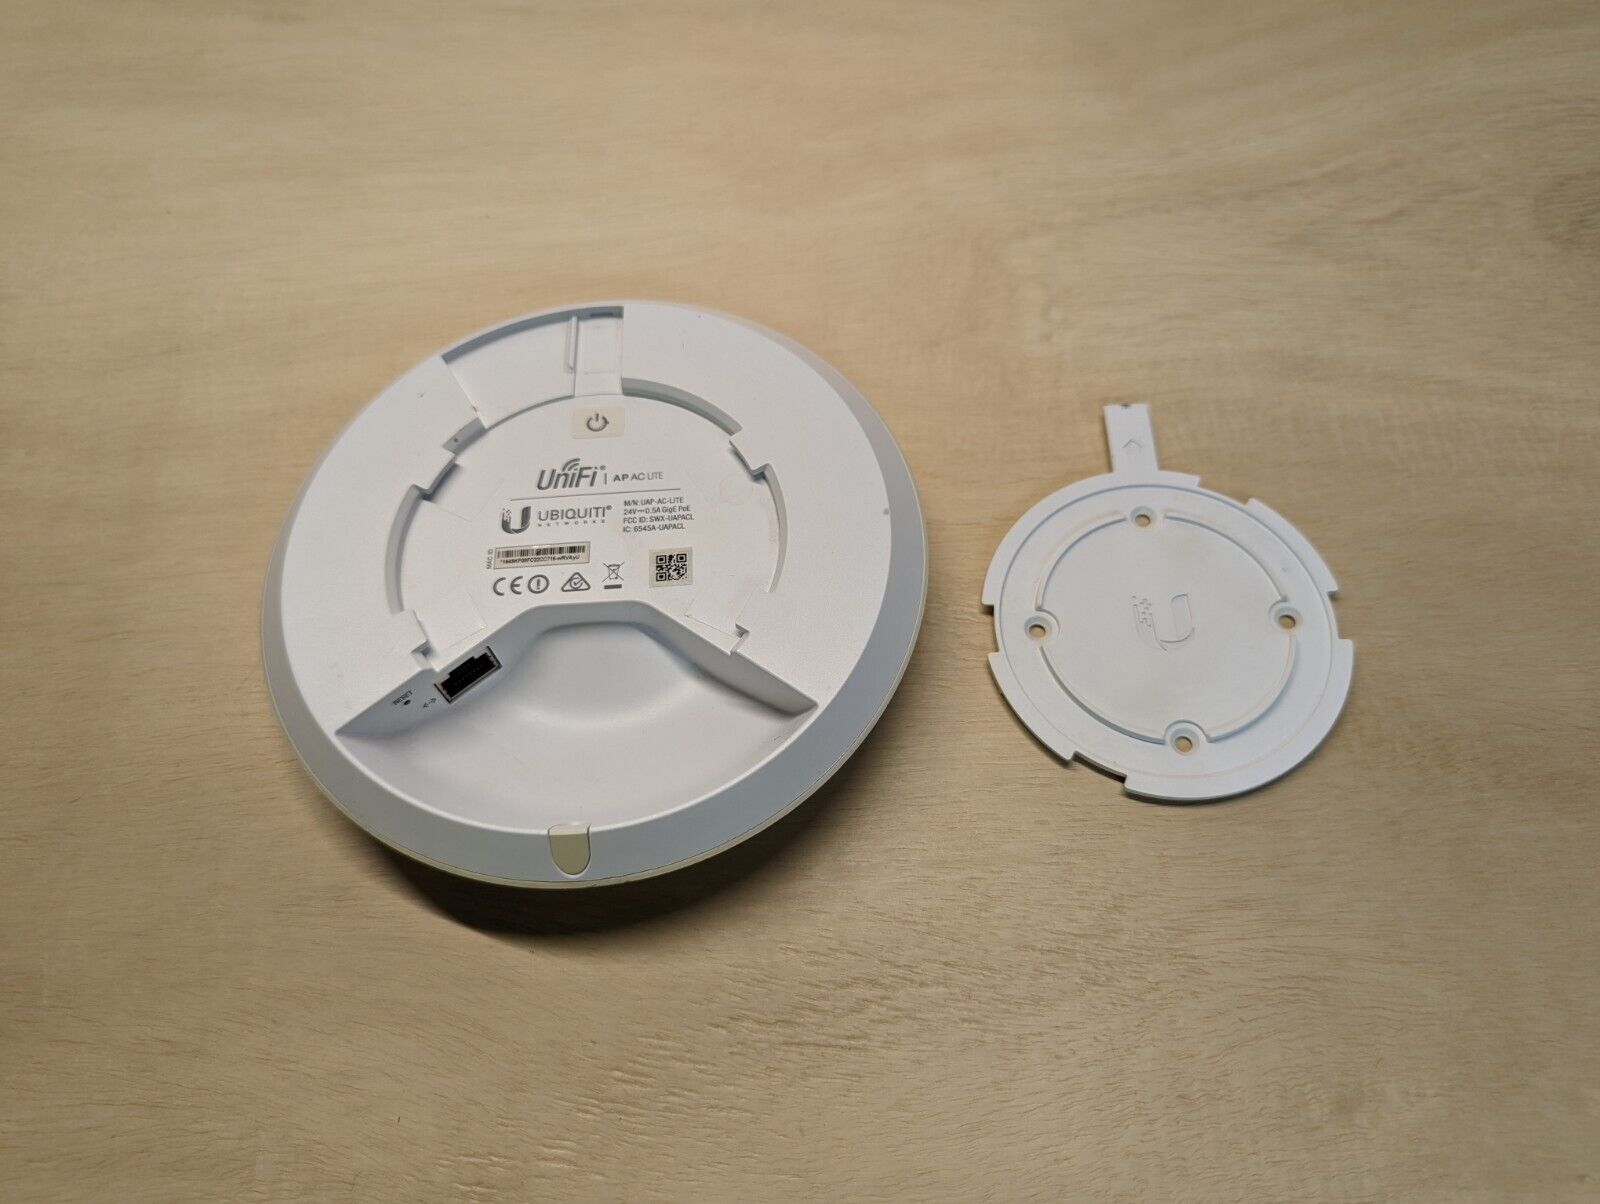 Ubiquiti UAP-AC-Lite Wireless Access Point Used Working Condition